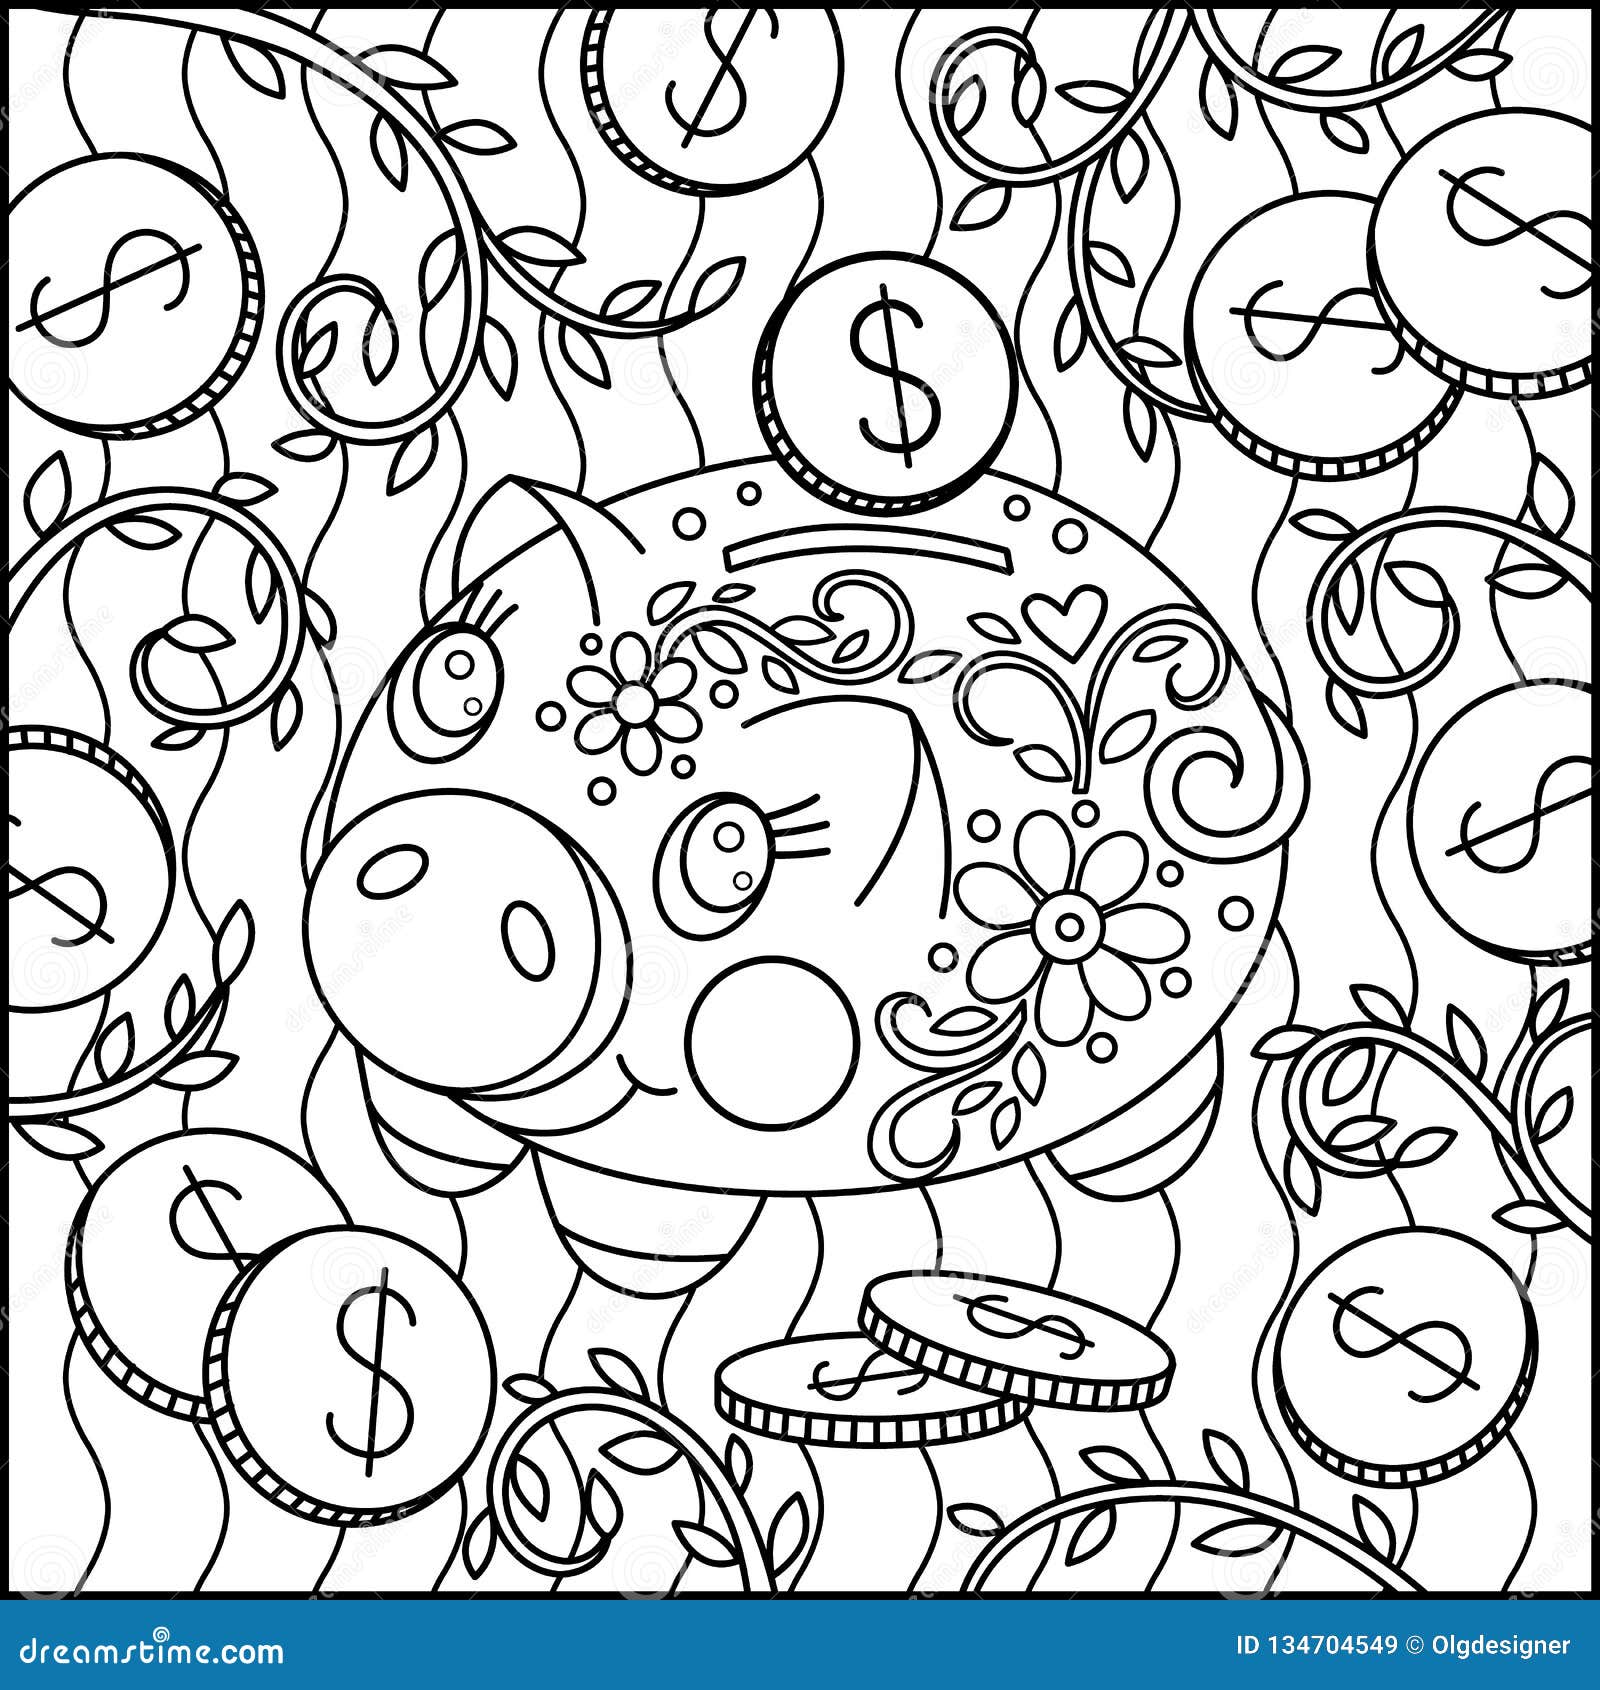 Piggy bank coloring page stock illustrations â piggy bank coloring page stock illustrations vectors clipart